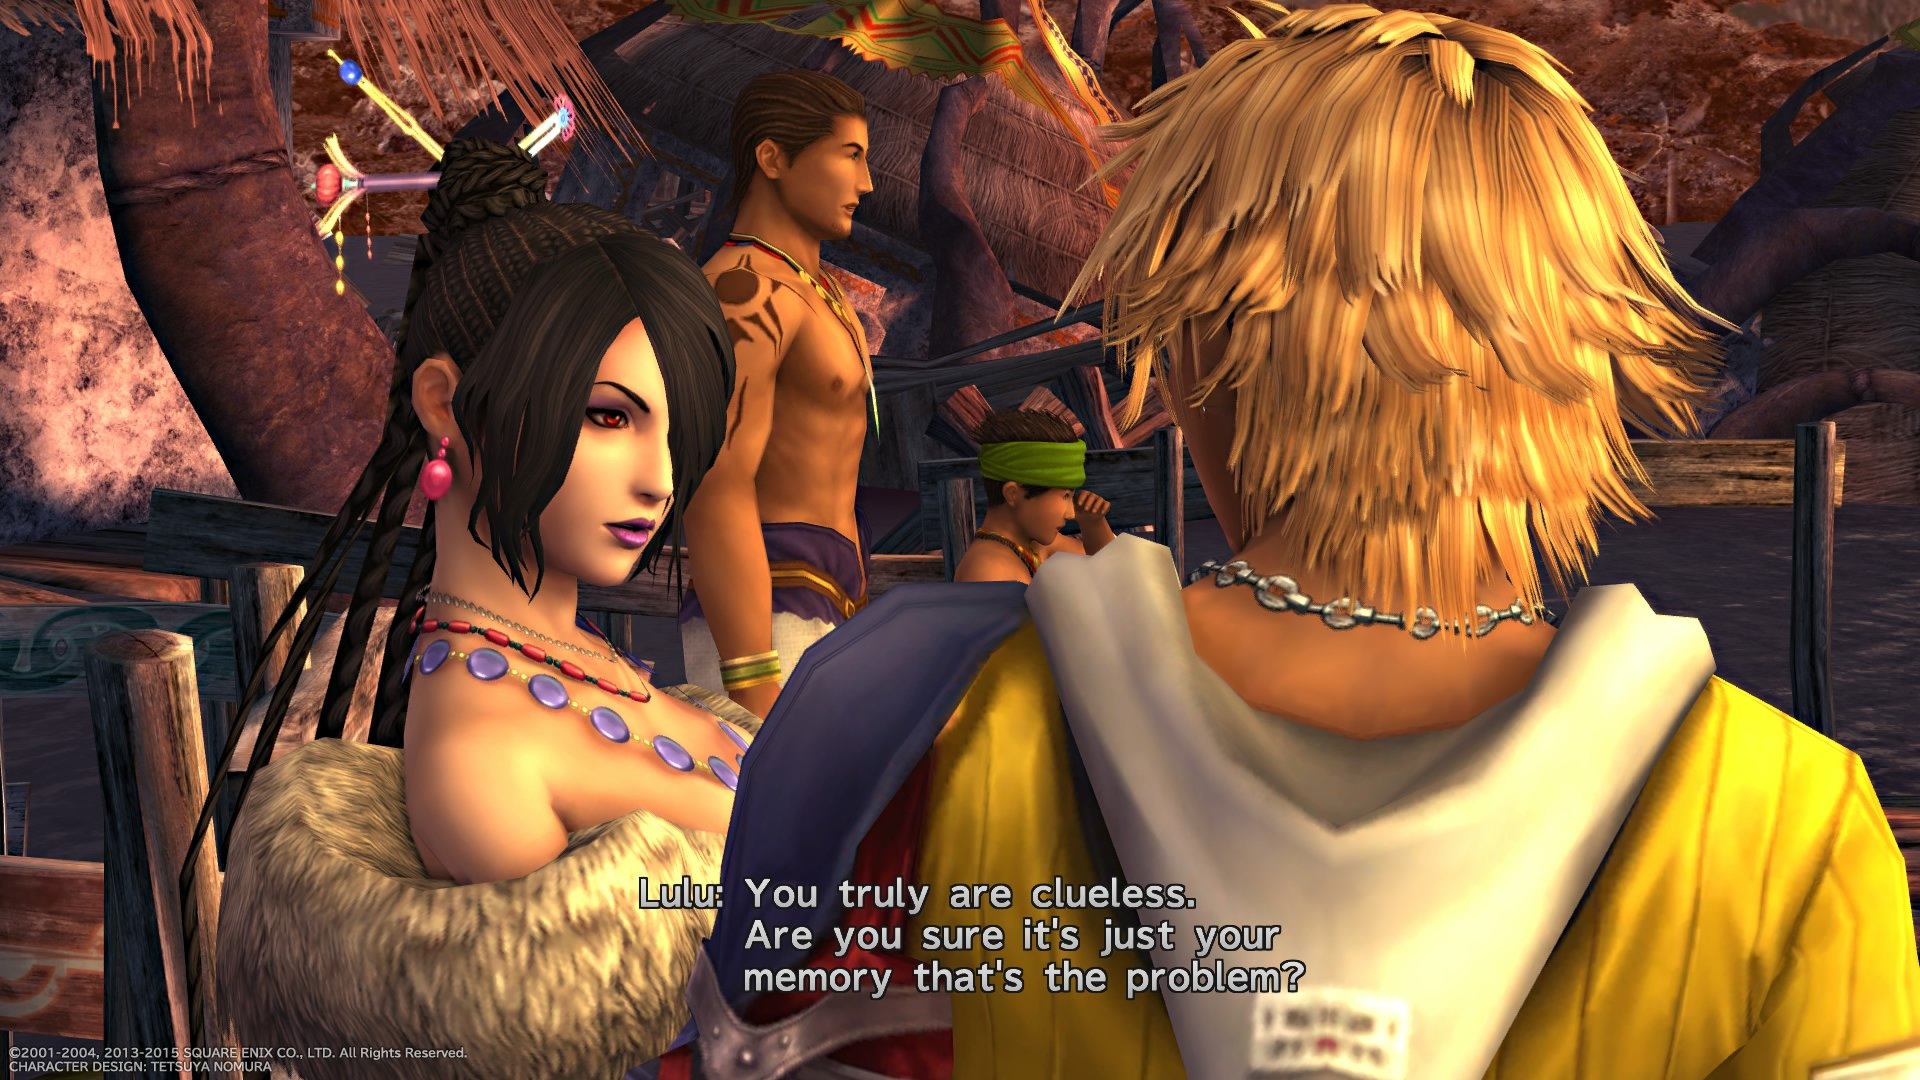 Final Fantasy X/X-2 HD Remaster review: music of the spheres